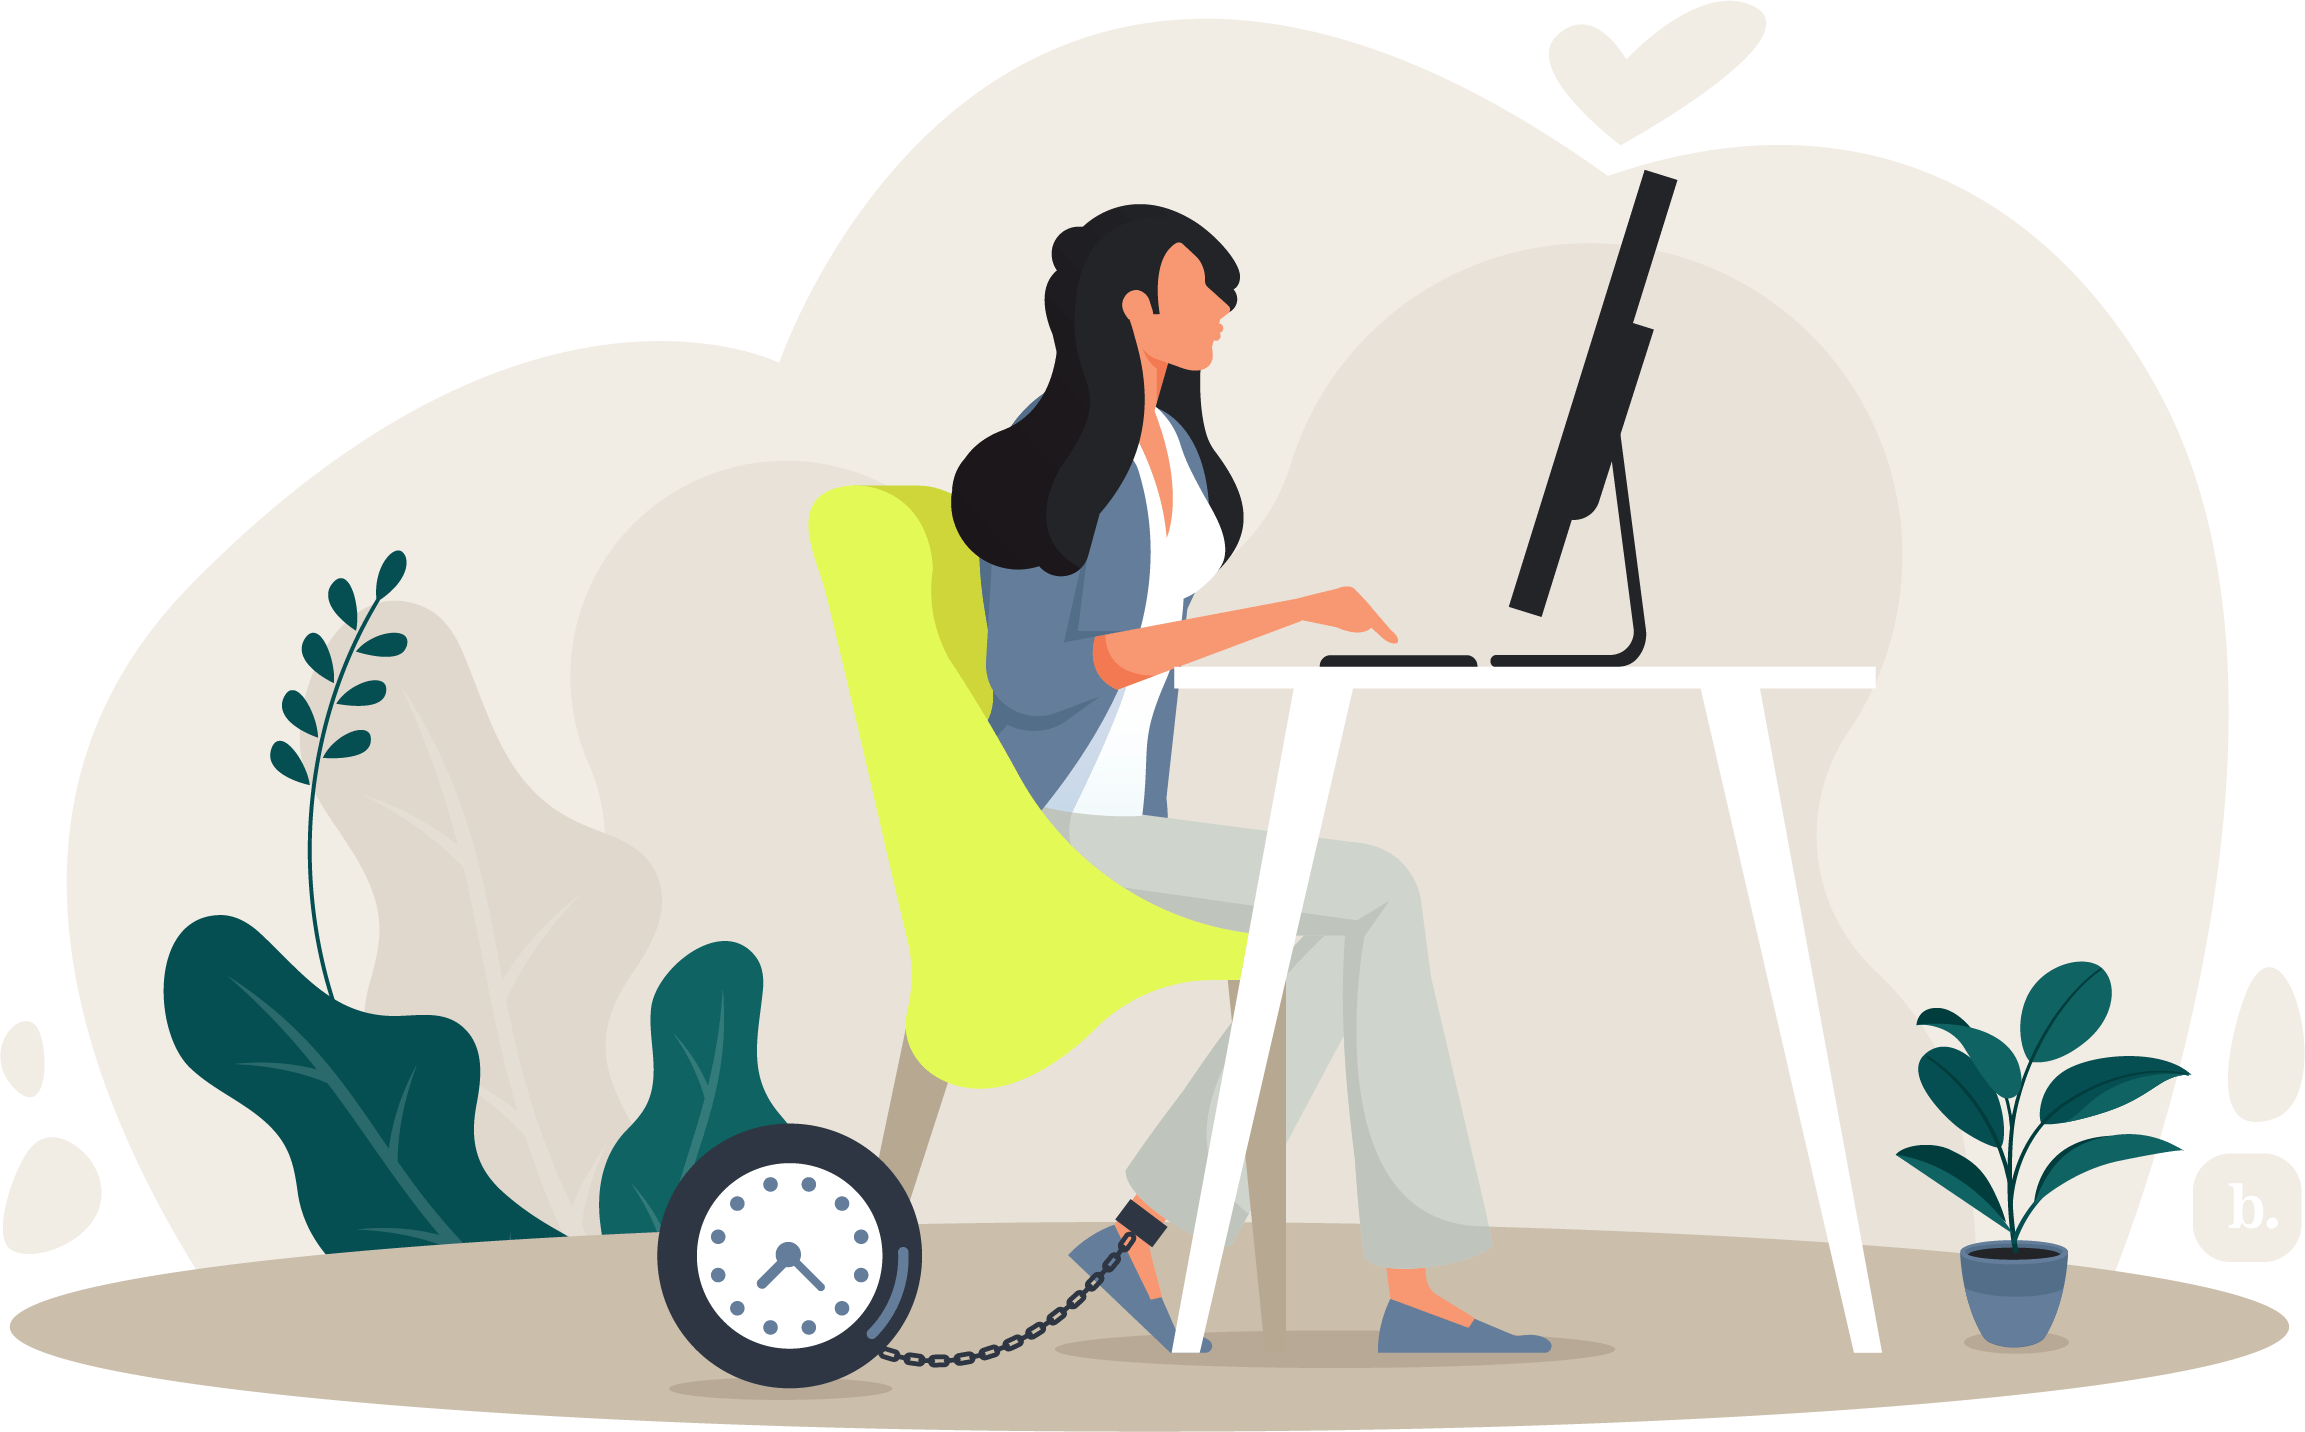 graphic of a businessperson at a desk with a clock chained to their ankle